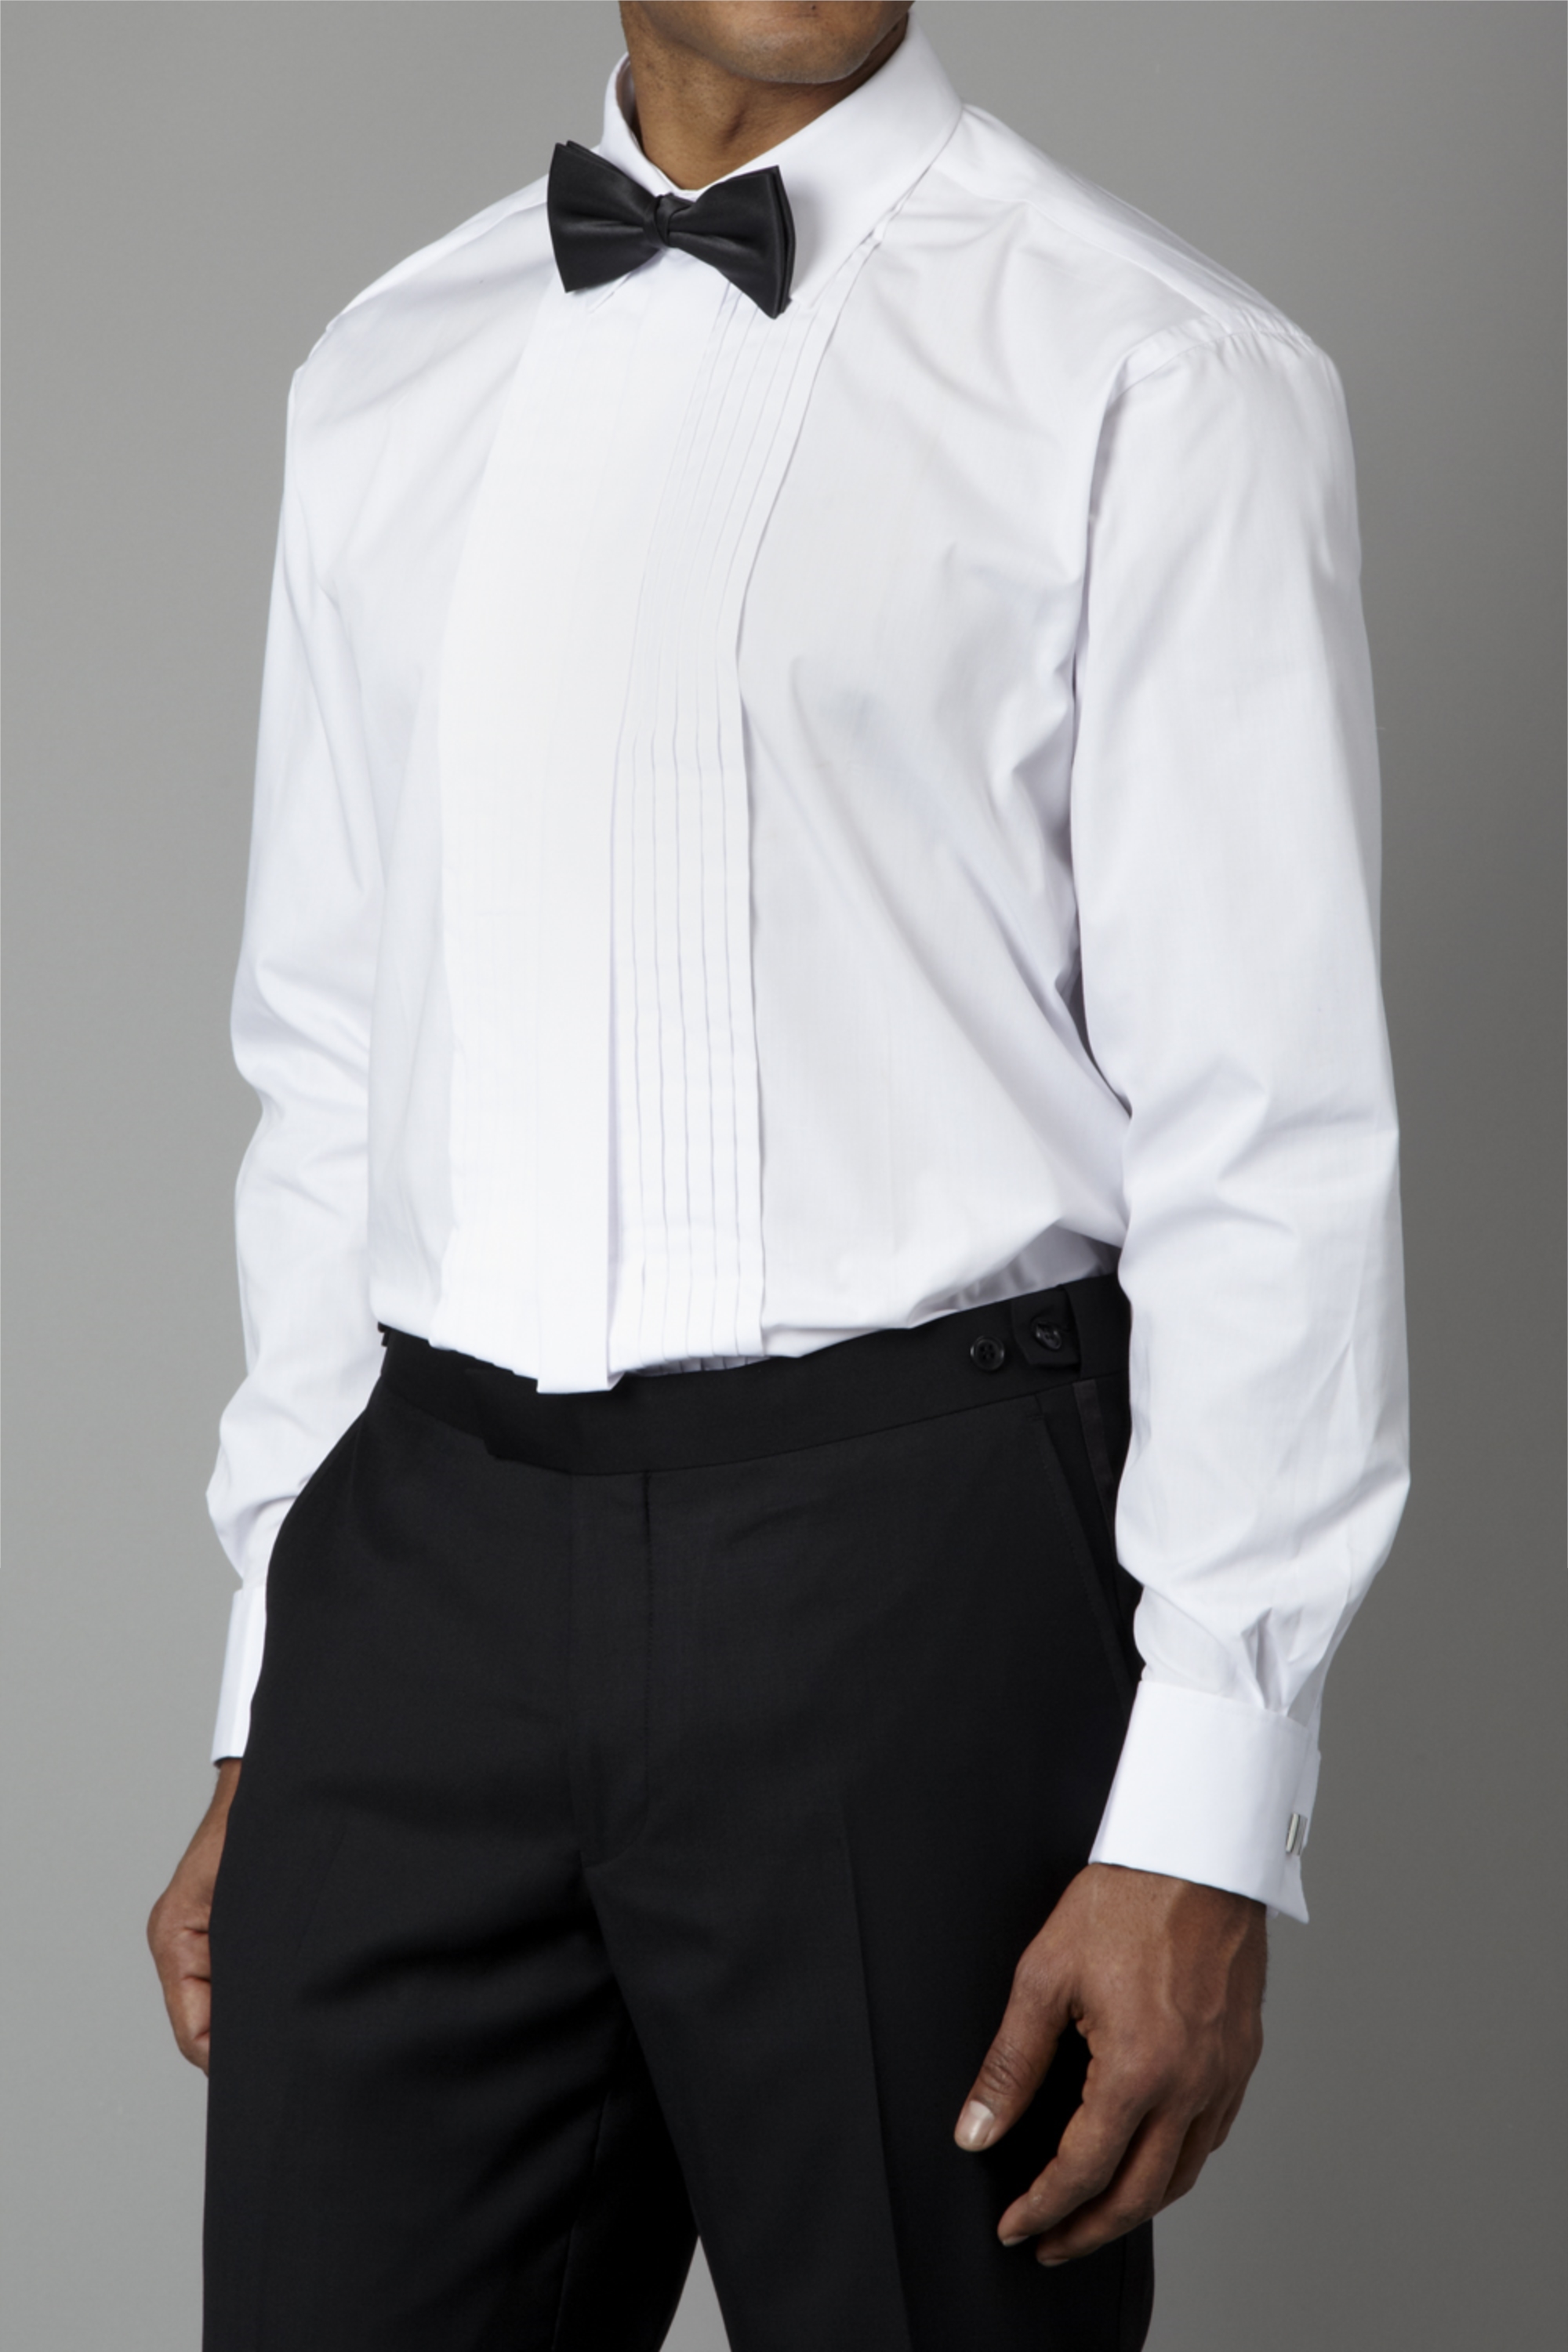 Moss Bros Regular Fit Dress Shirt in white with 6 pleats and a normal ...